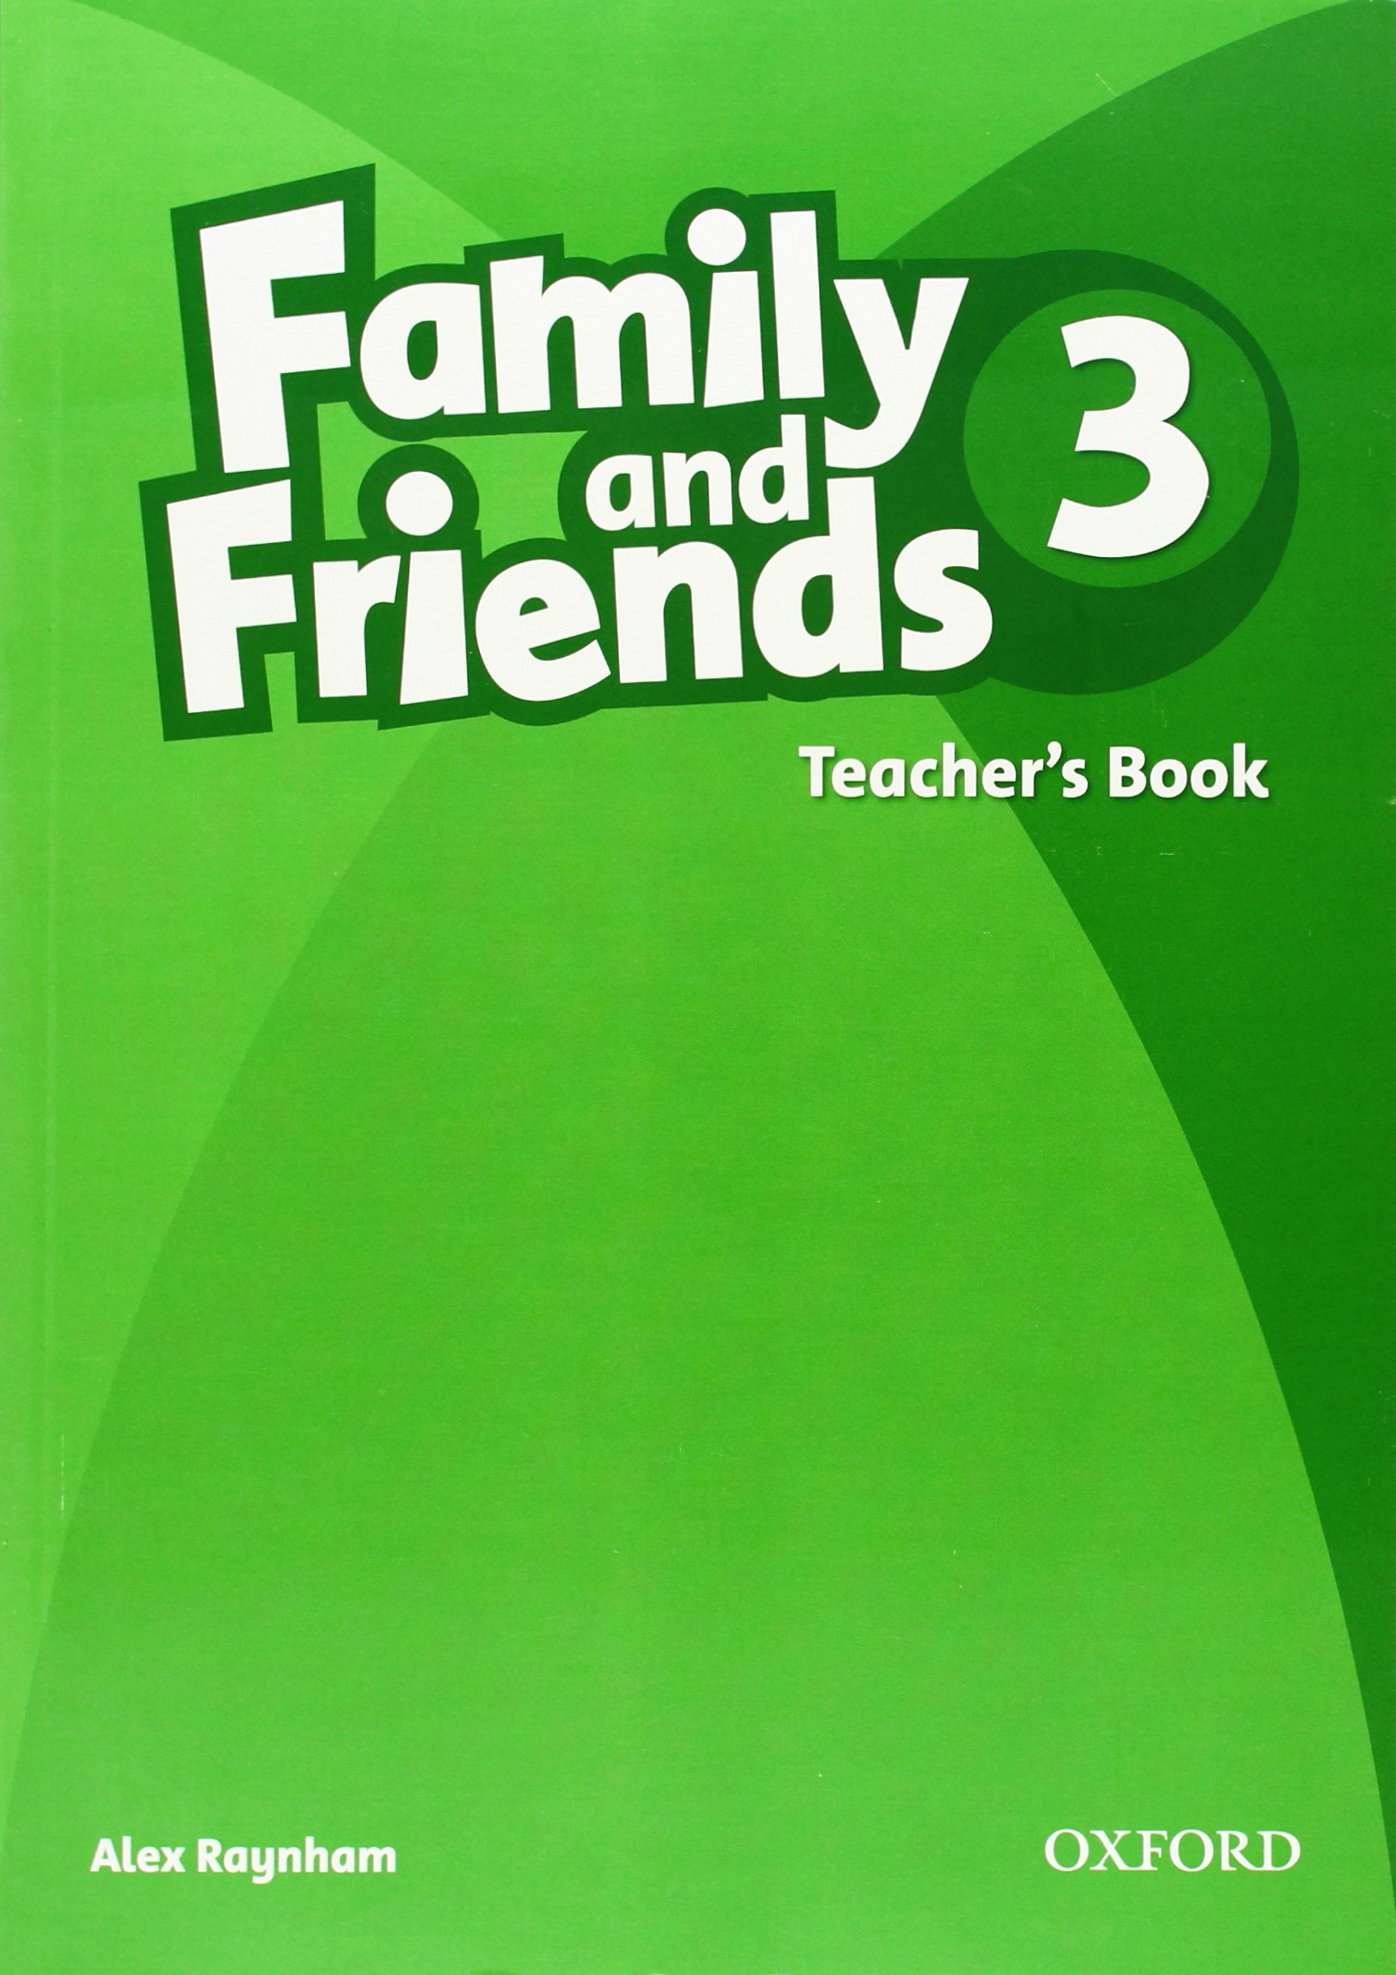 FAMILY AND FRIENDS 3 Teacher's Book